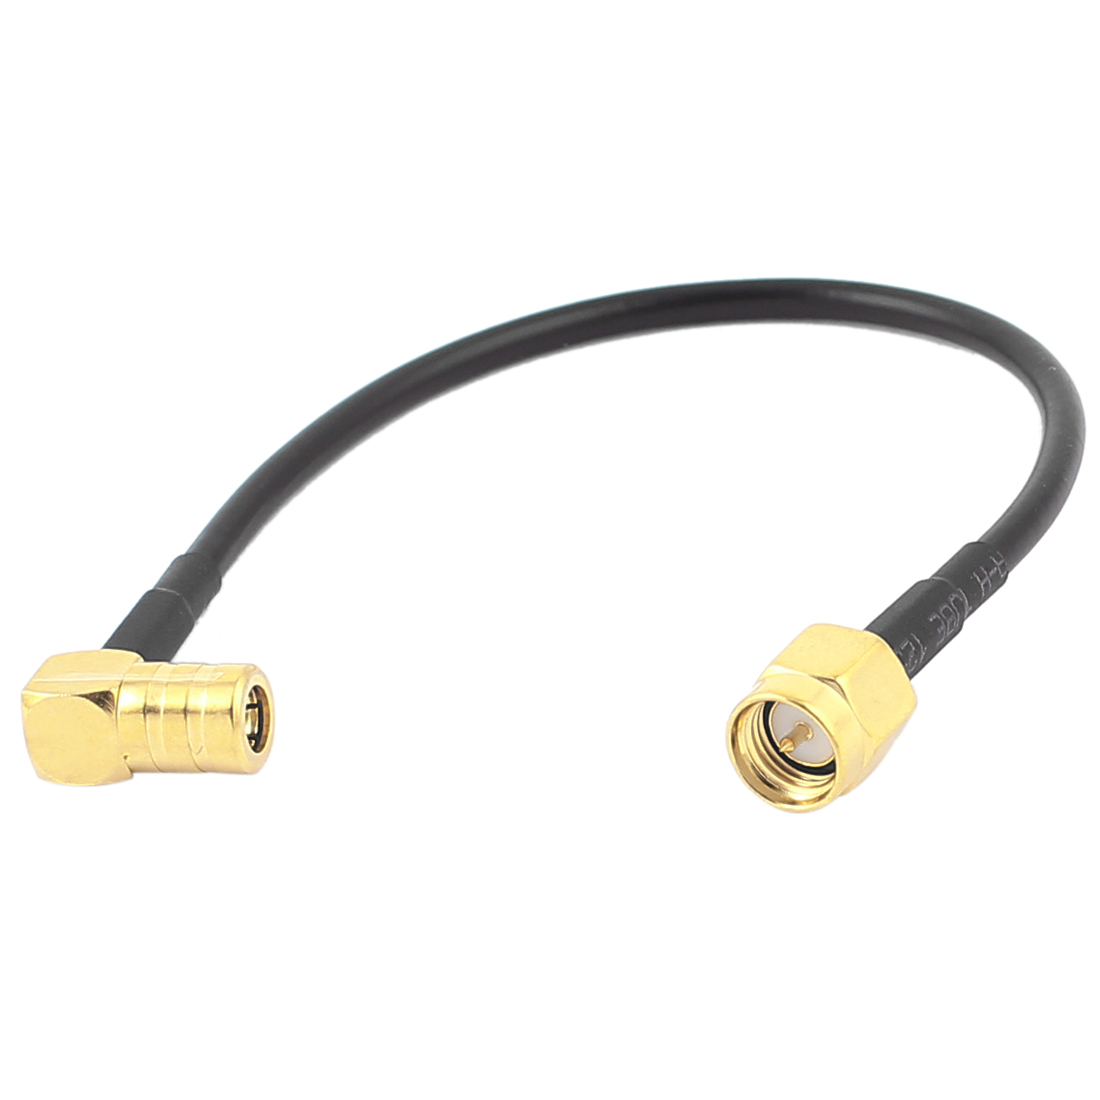 SMA-J Female to BNC-KY Male RG174 Coaxial Cable Pigtail 15cm